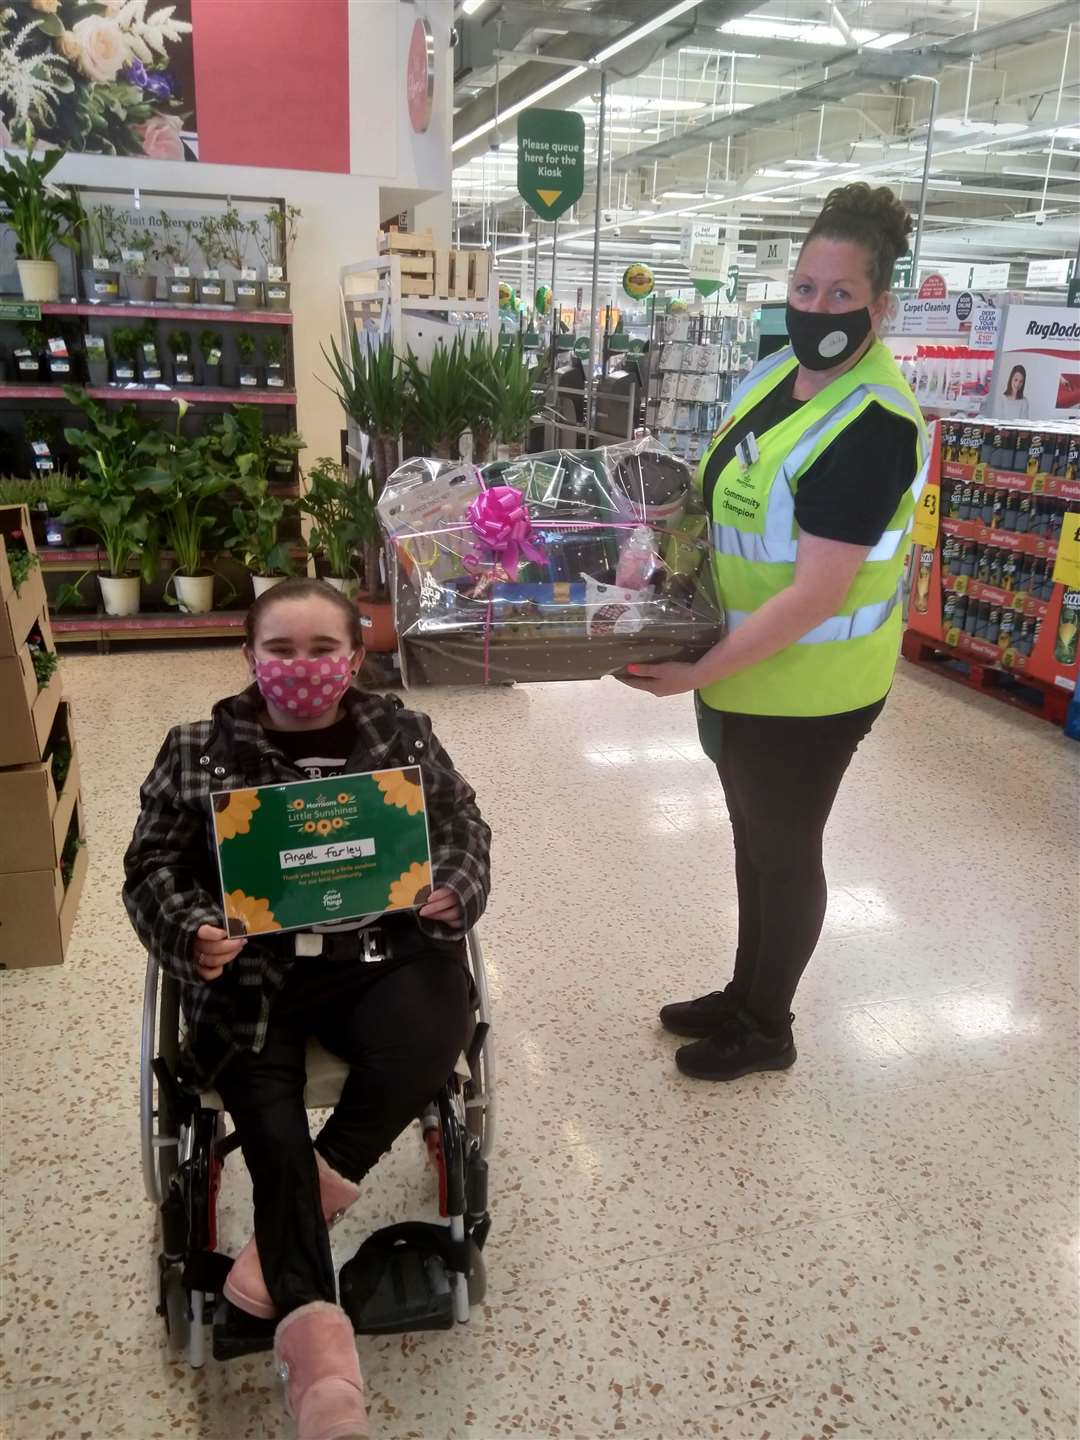 Angel Farley receiving her certificate and goodies from Morrisons in Sittingbourne